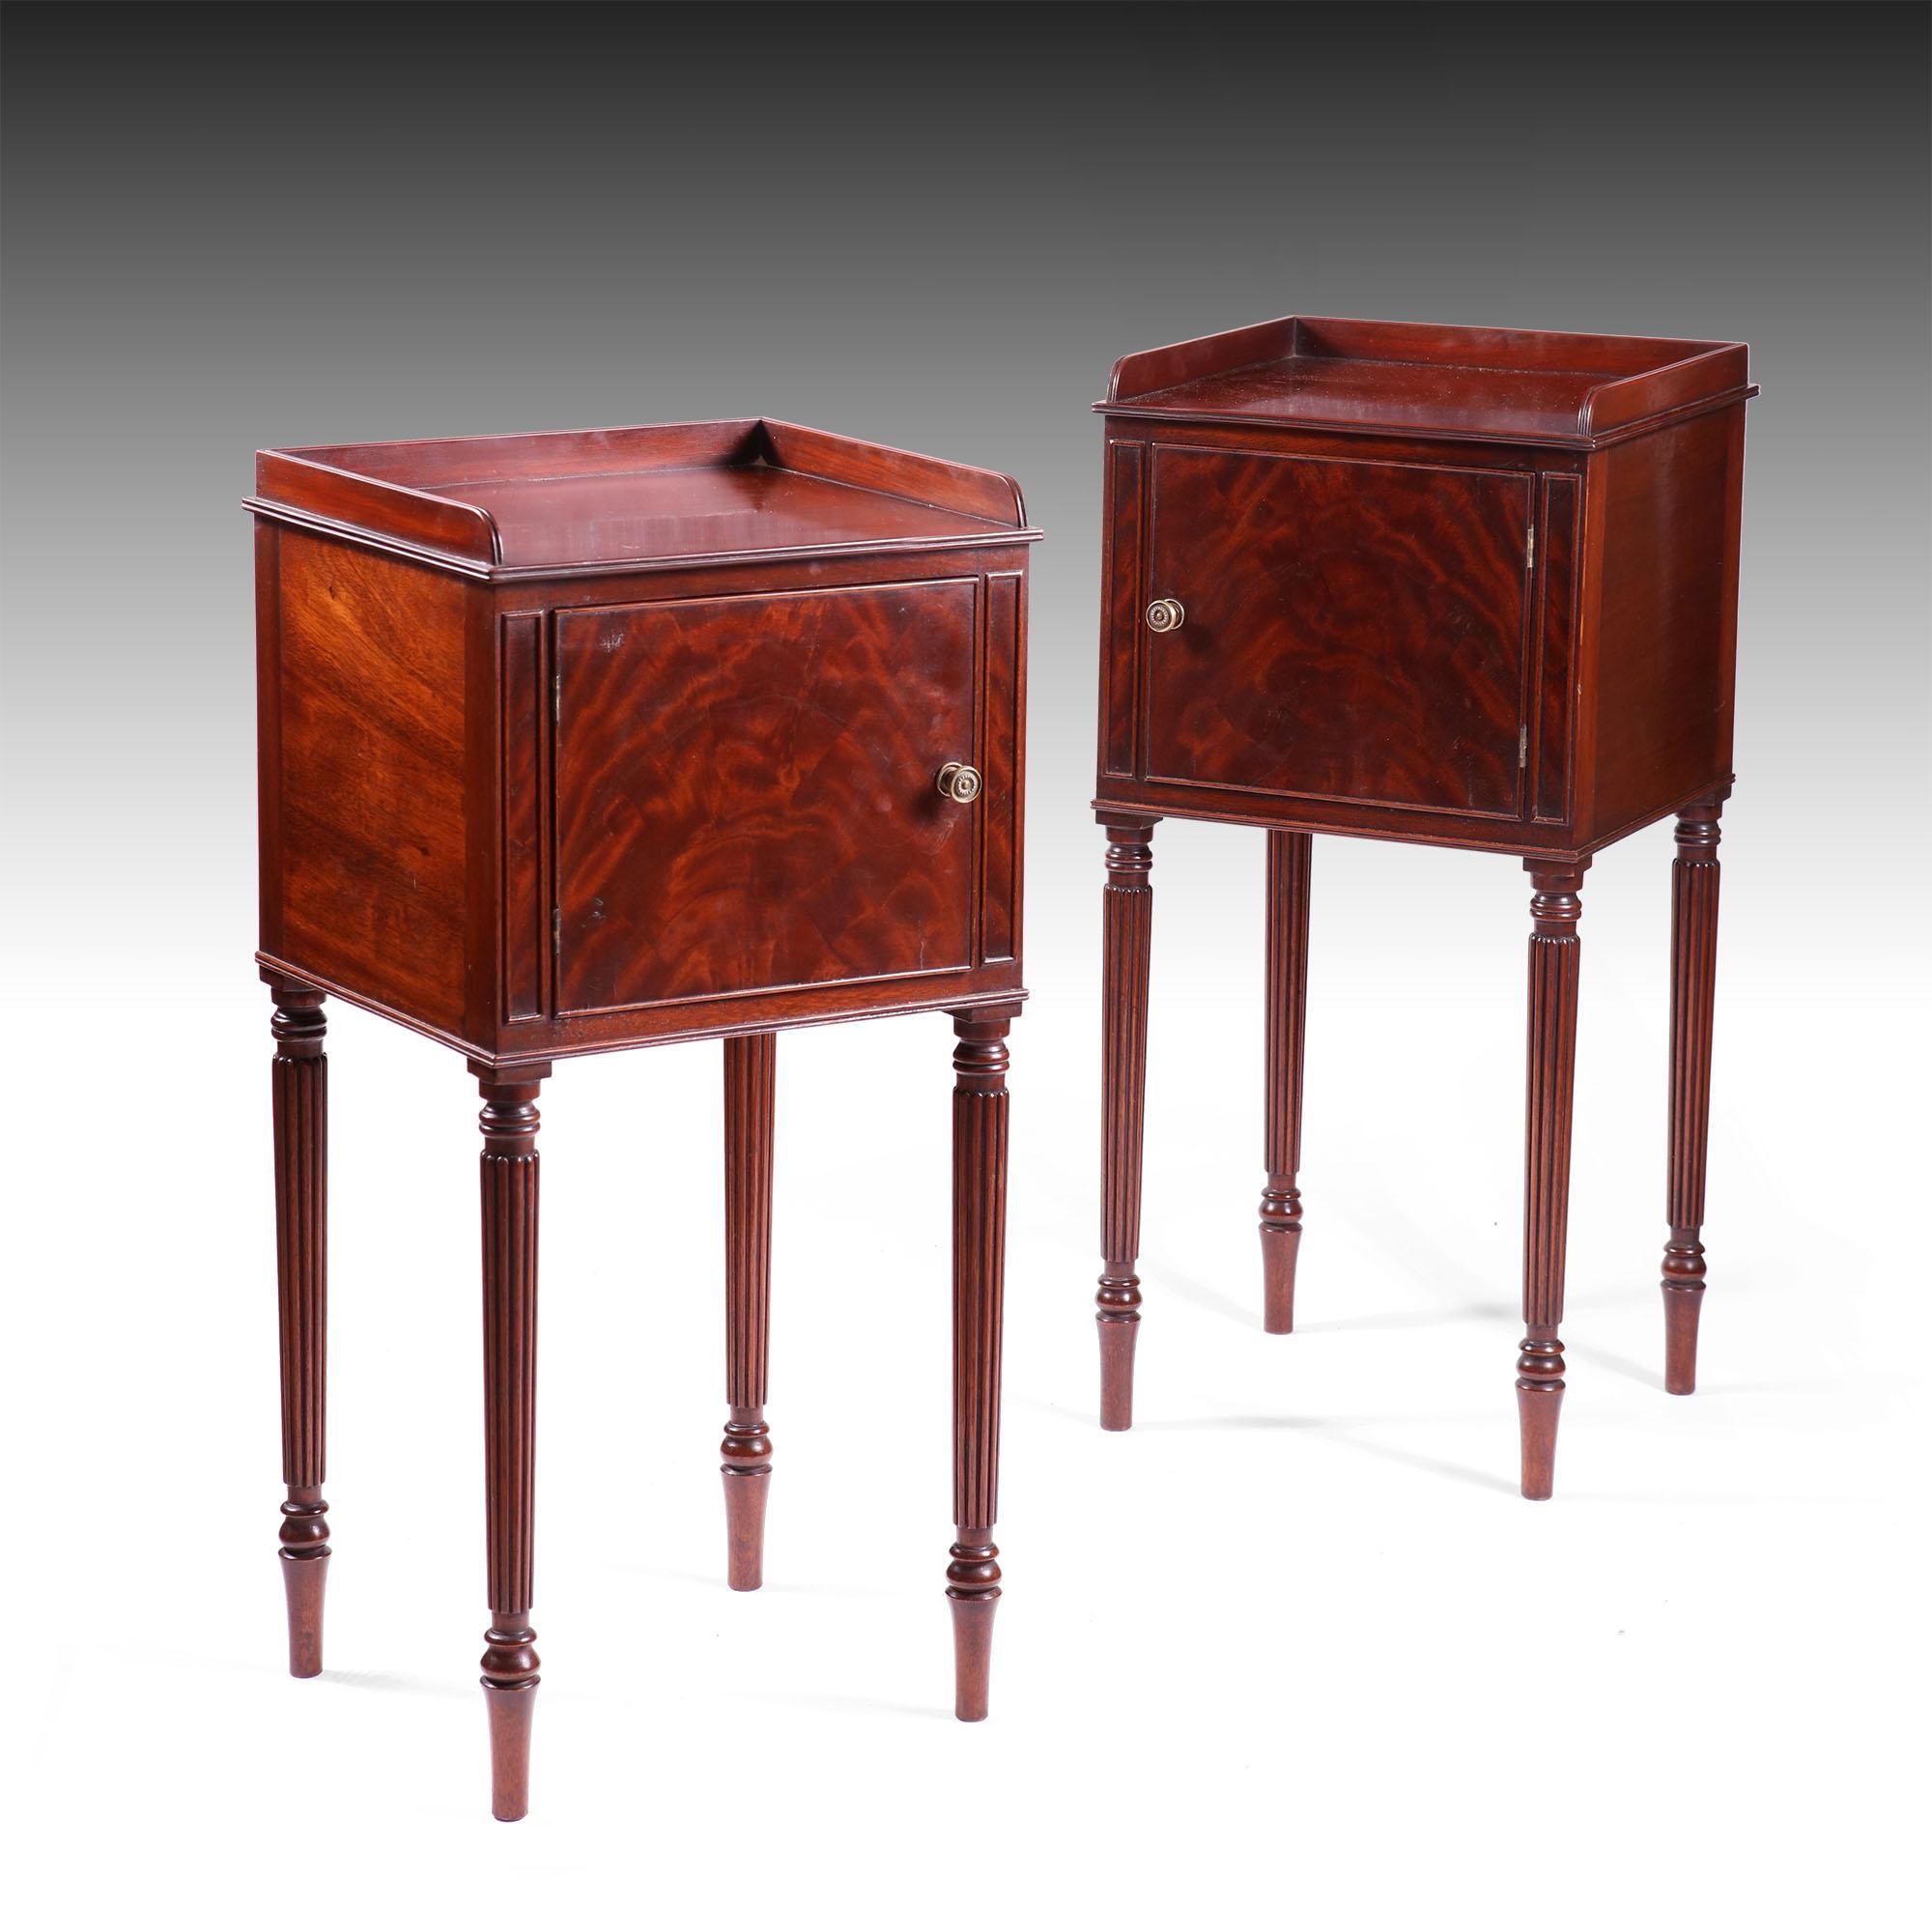 A fine pair of mahogany bedside cabinets in the manner of Gillows with typical reeded tapering legs supporting bodies with a single door and veneered with flame mahogany. 
England, circa 1900 
Measures: 15 ins wide 38cm
13 ins deep 33cm
31 ins